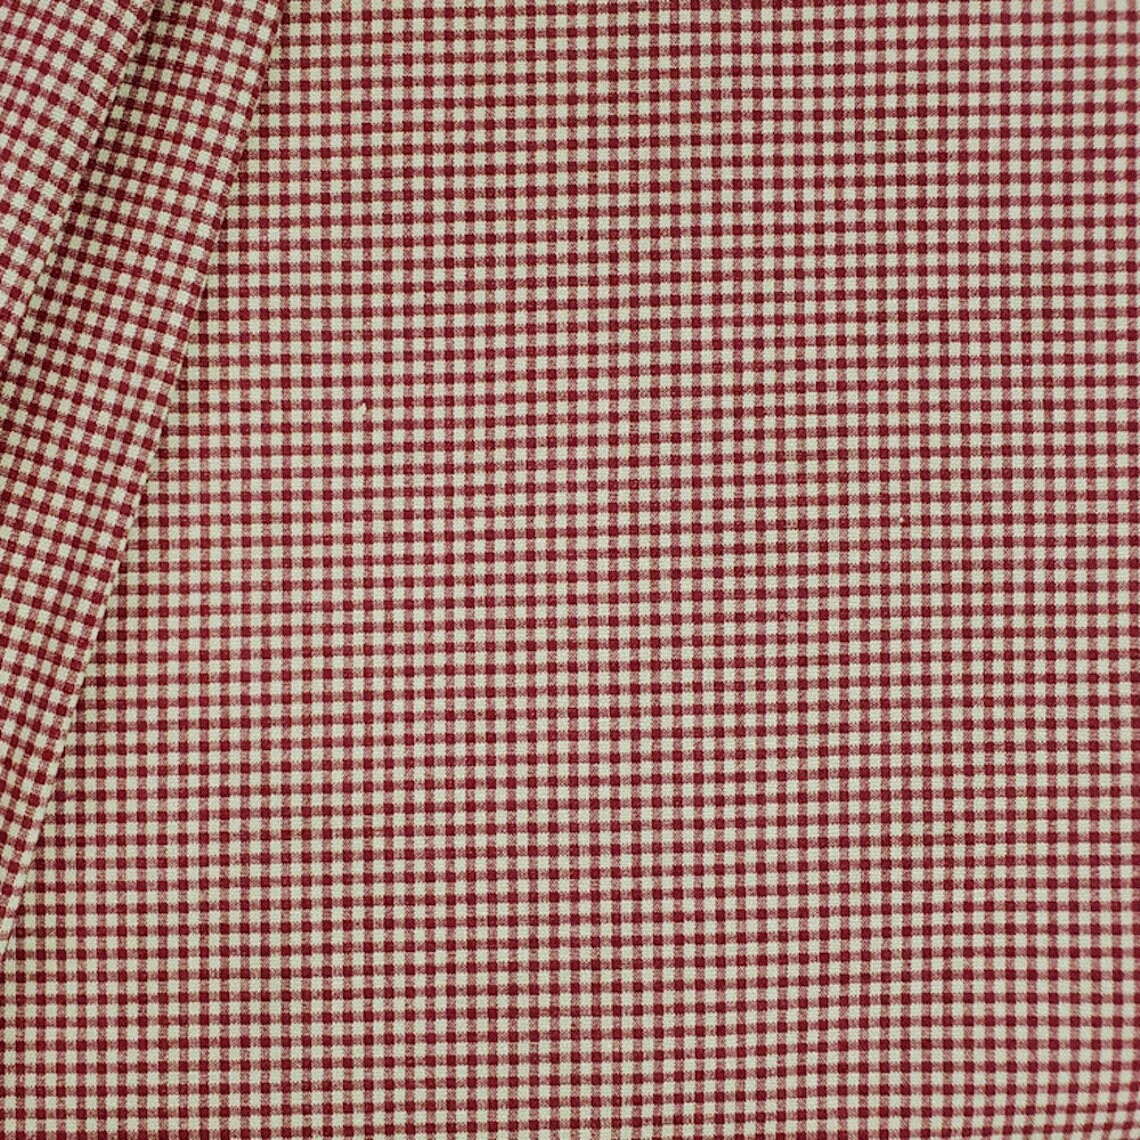 tailored valance in farmhouse red gingham check on beige